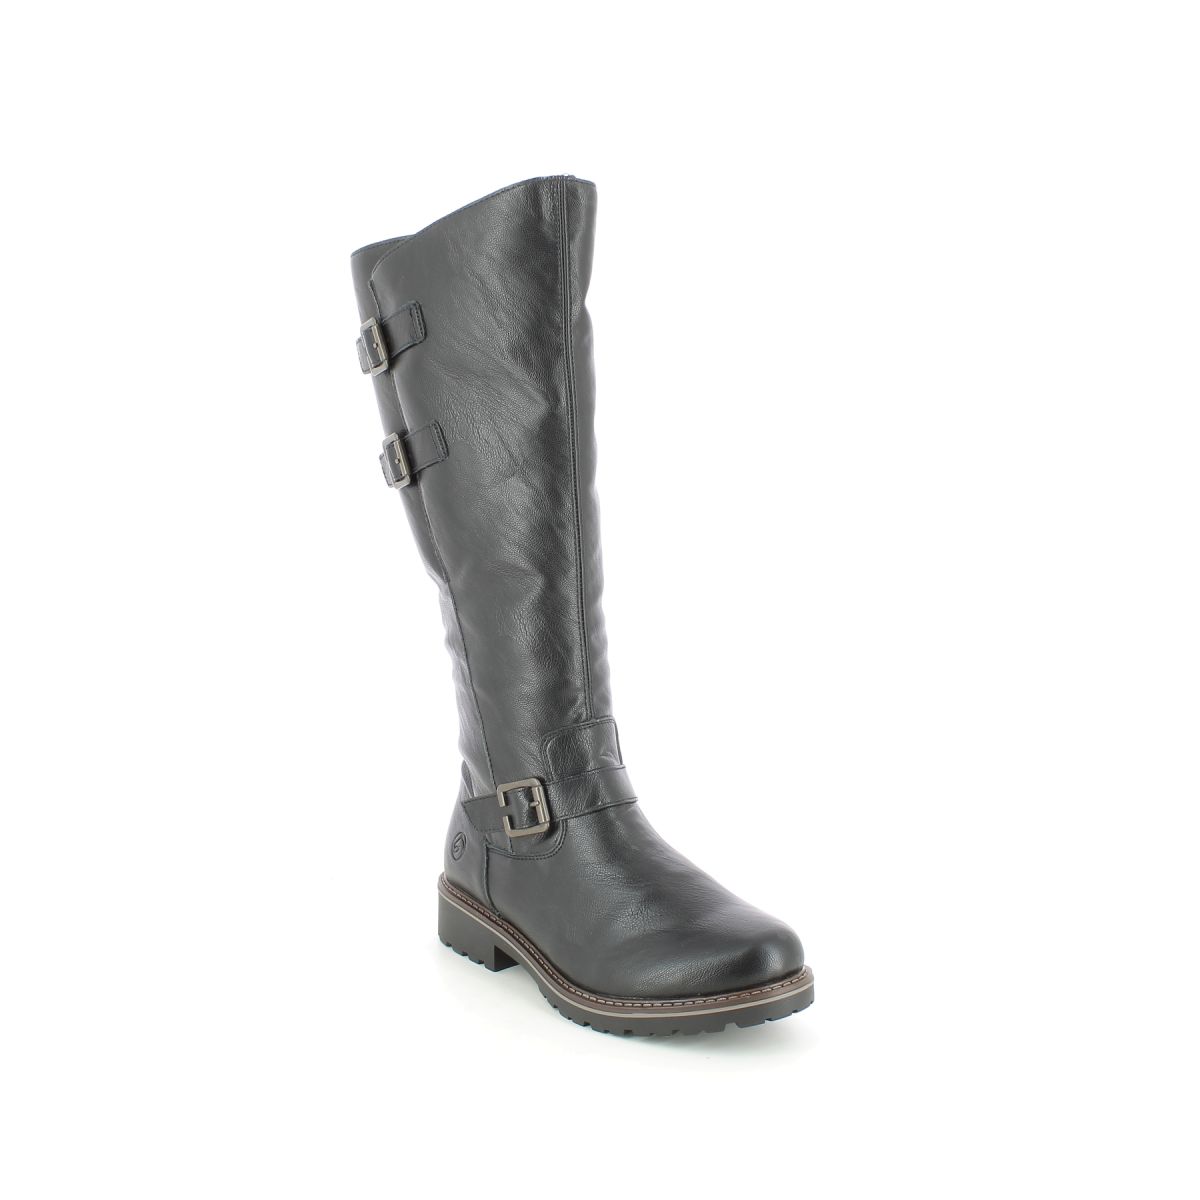 Remonte Indah Shearling Black Womens Knee-High Boots R6590-01 In Size 43 In Plain Black